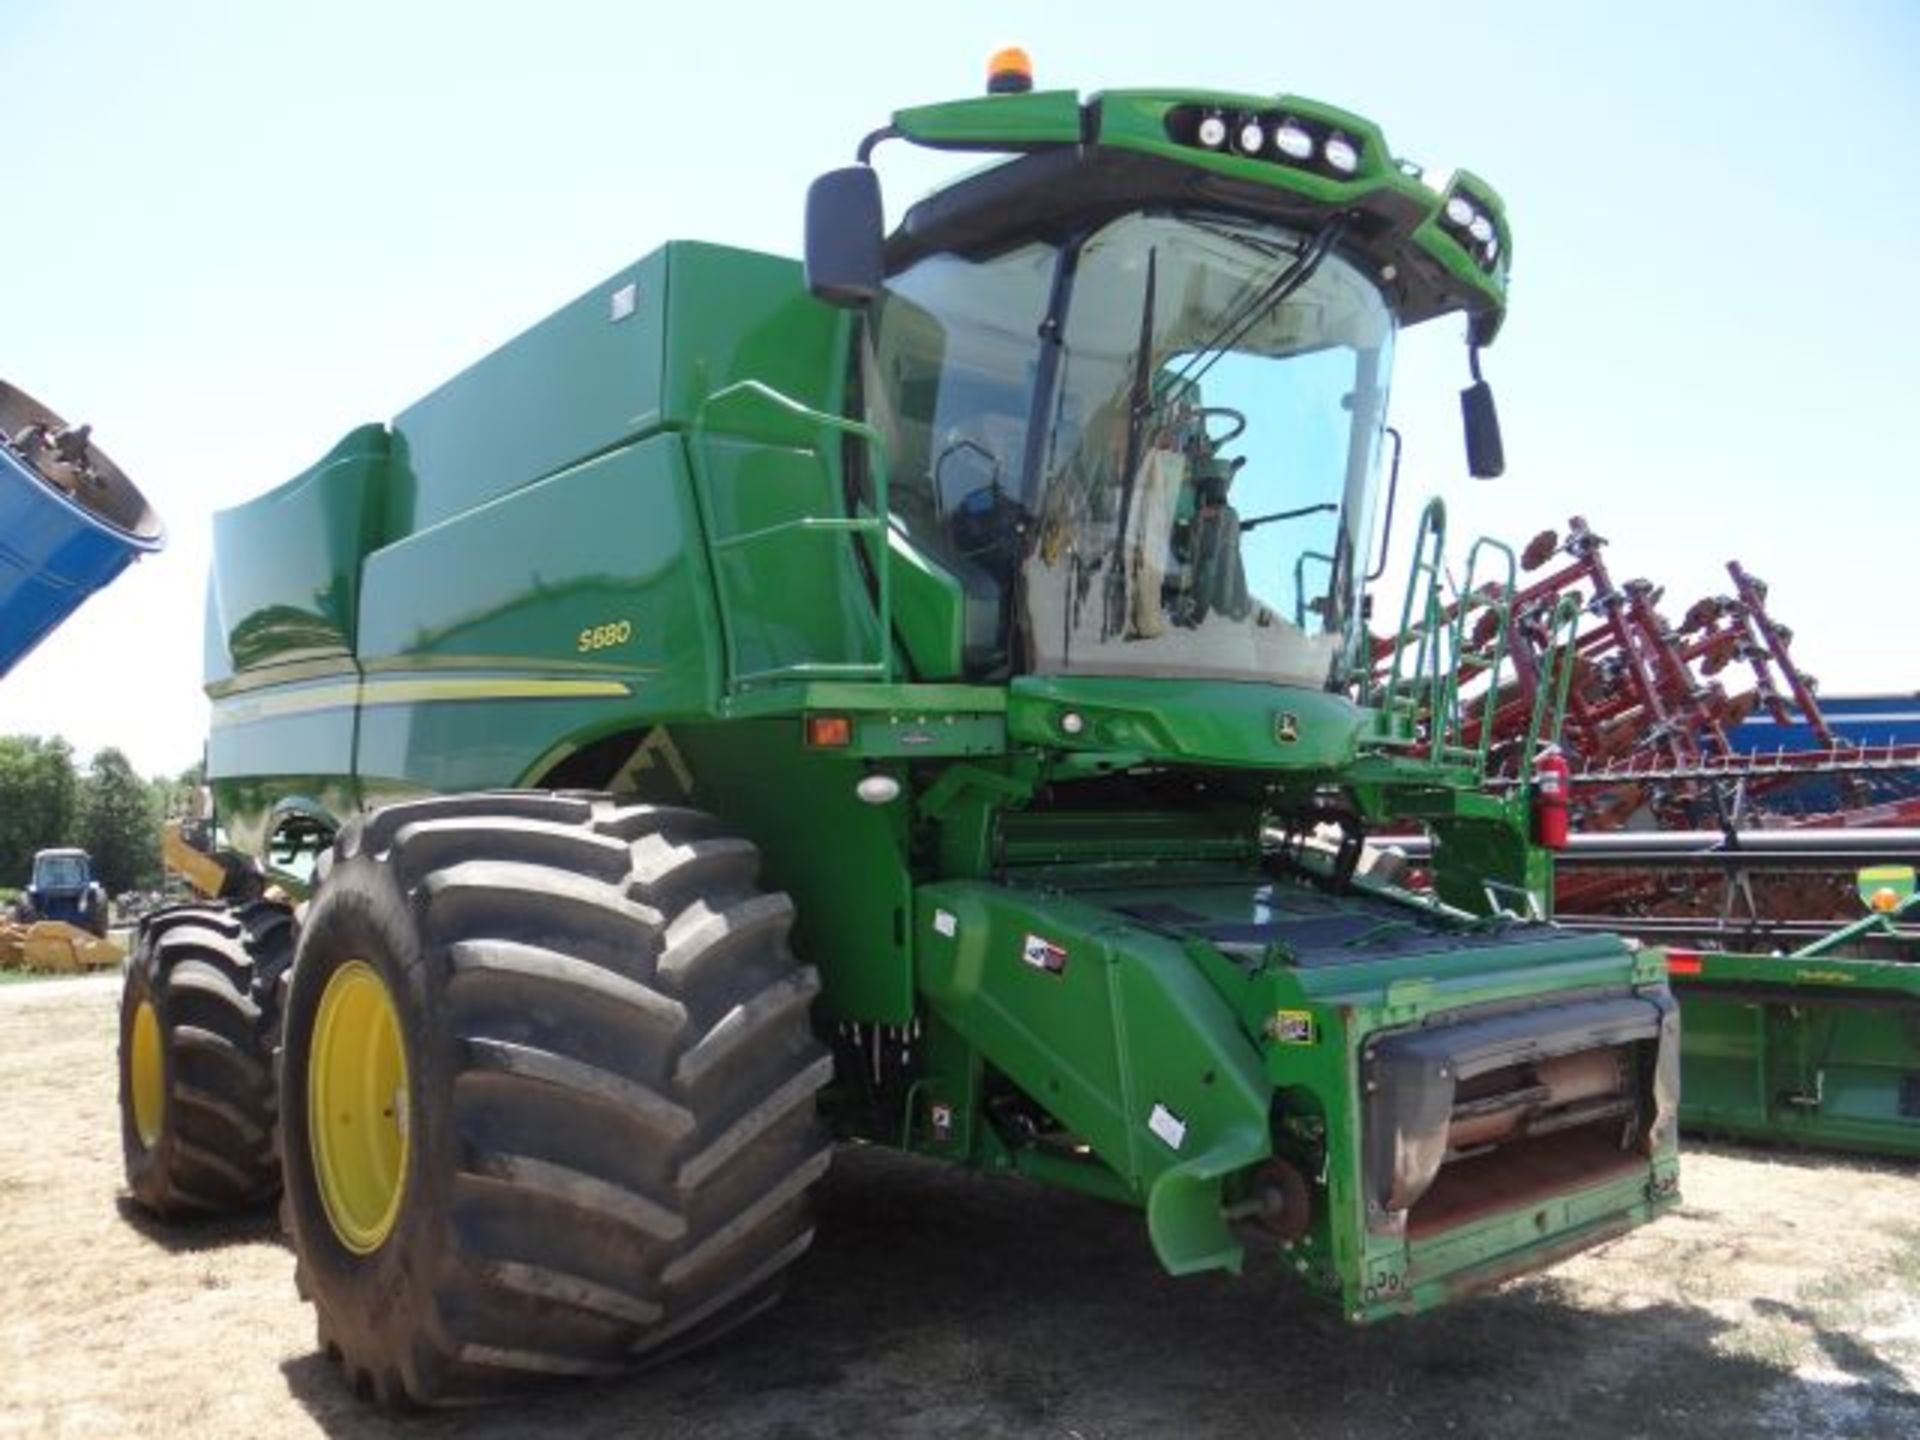 JD S680 Combine, 2012 #150819, 1299/956 hrs, PRWD, CM, Yield Monitor, Yield Mapping, Long - Image 2 of 6